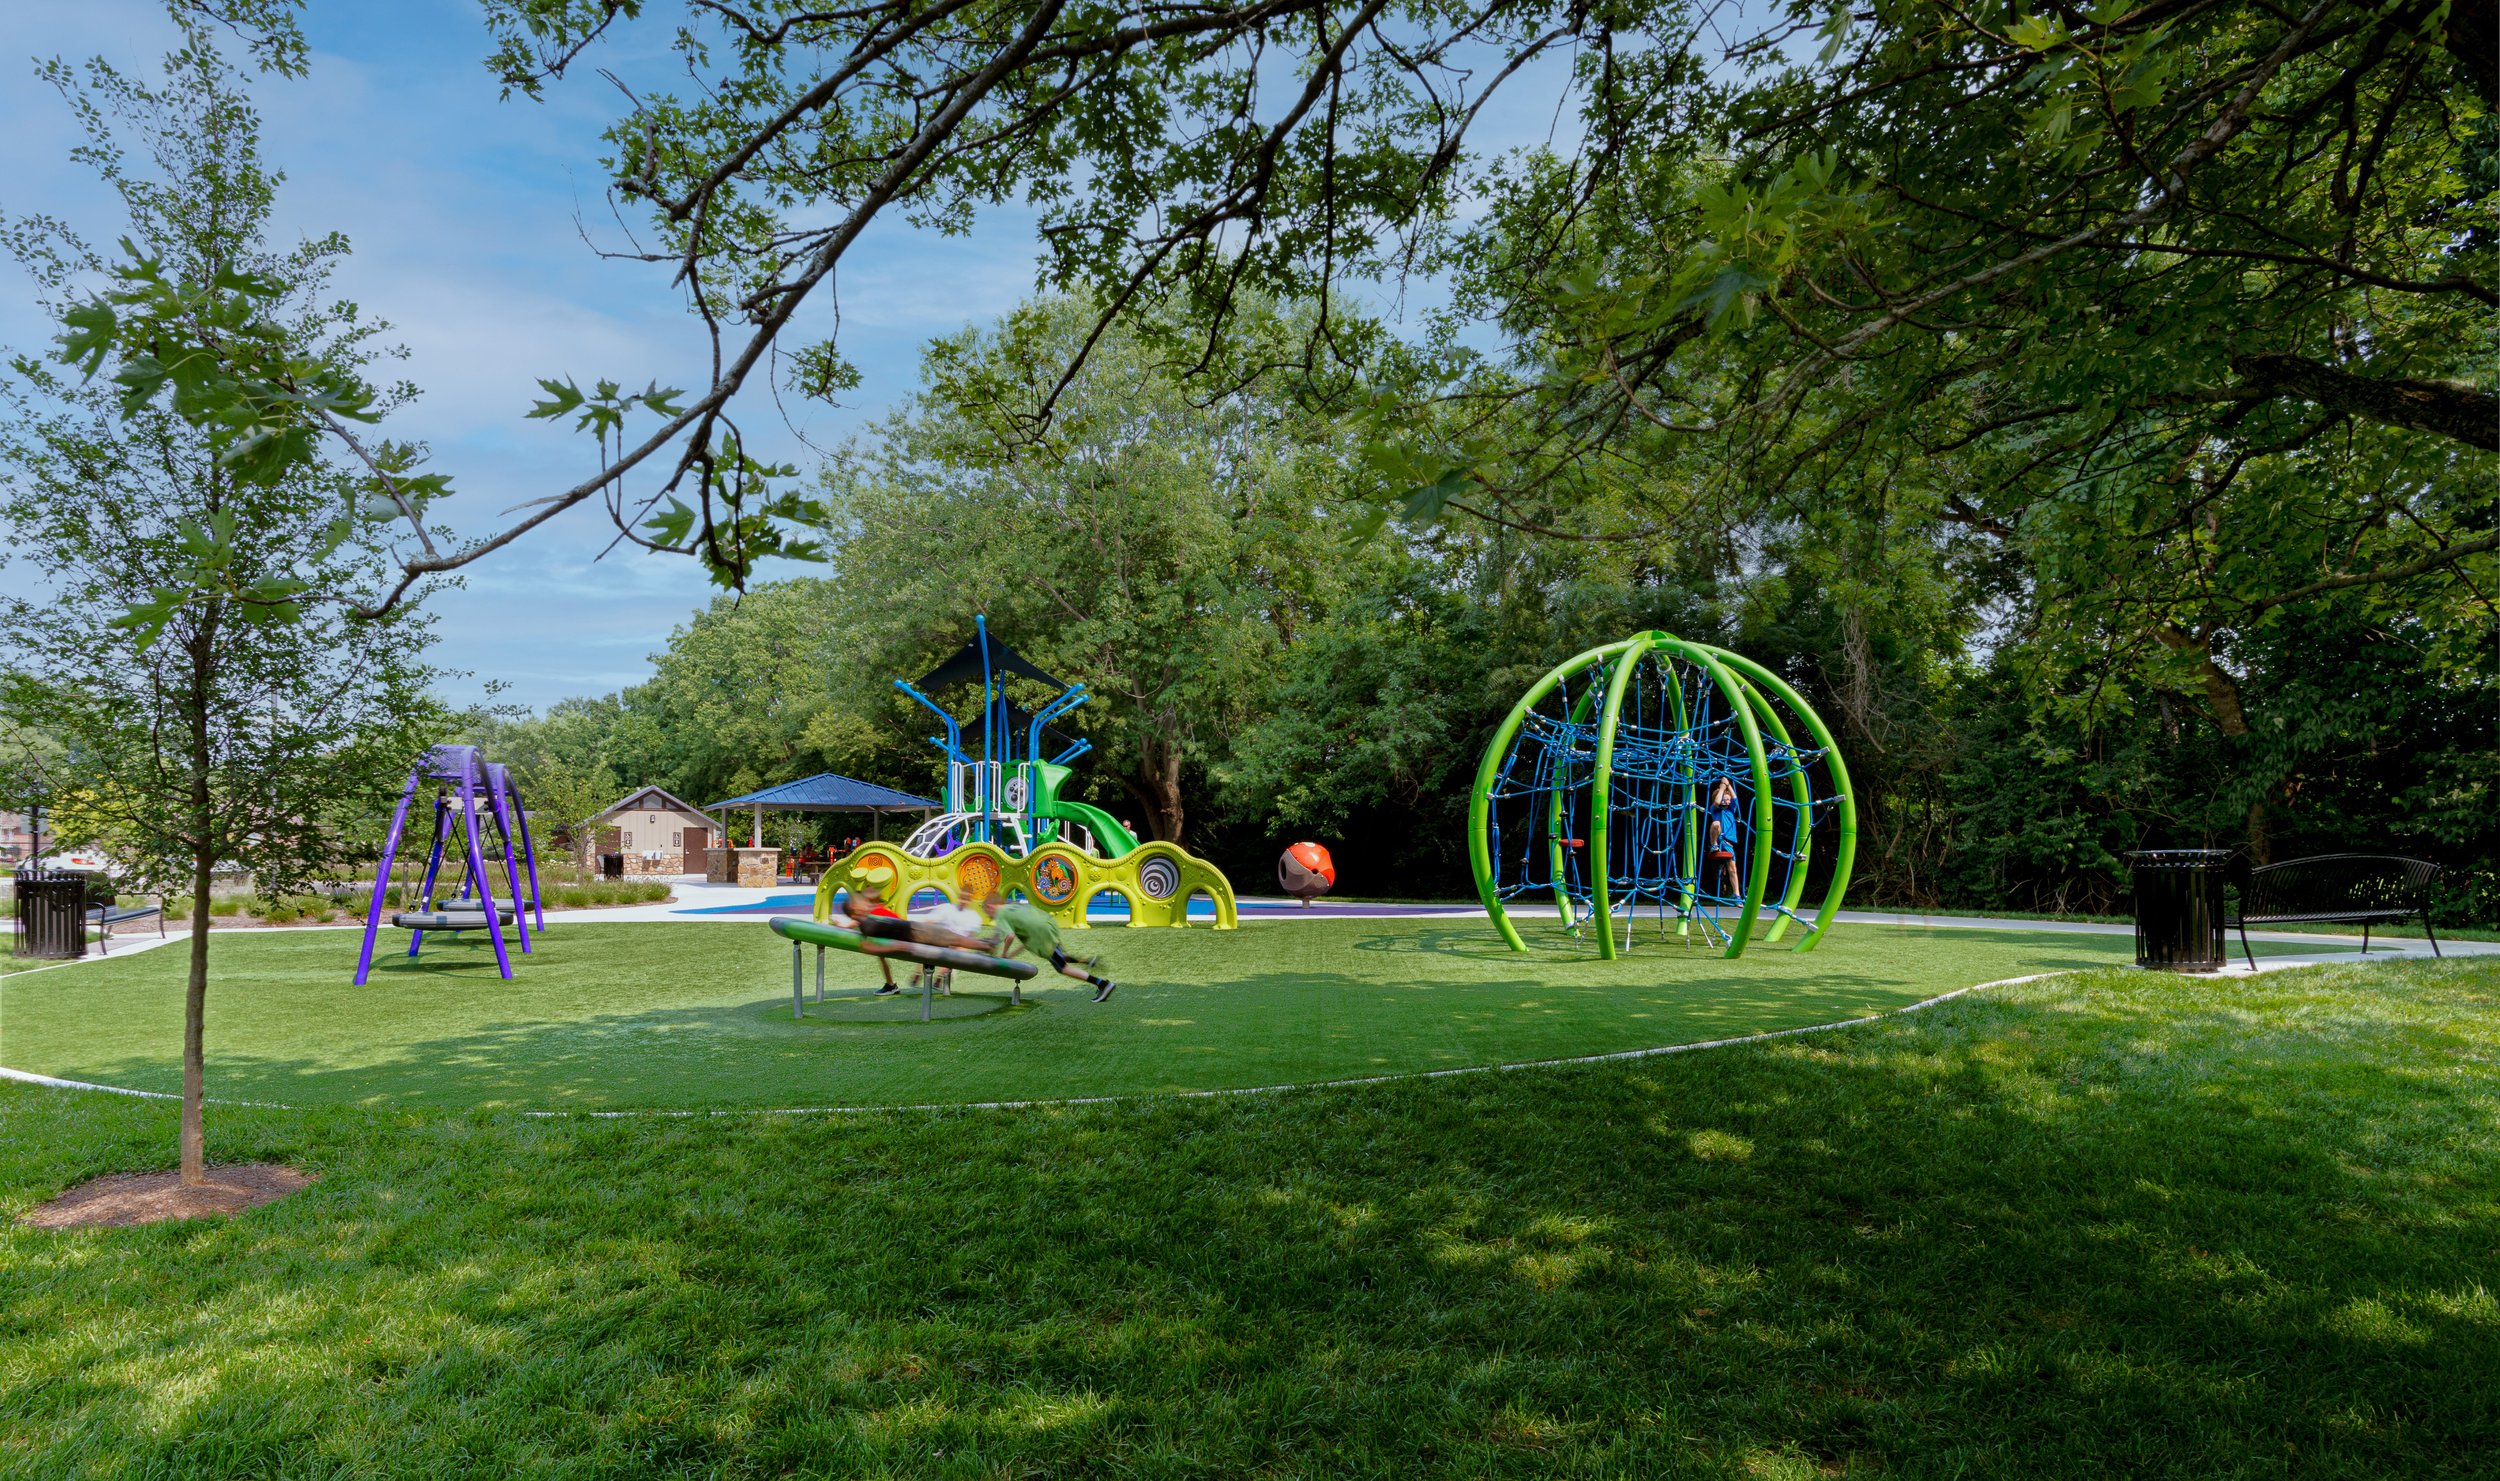 A photography of a playground in green open spaces.